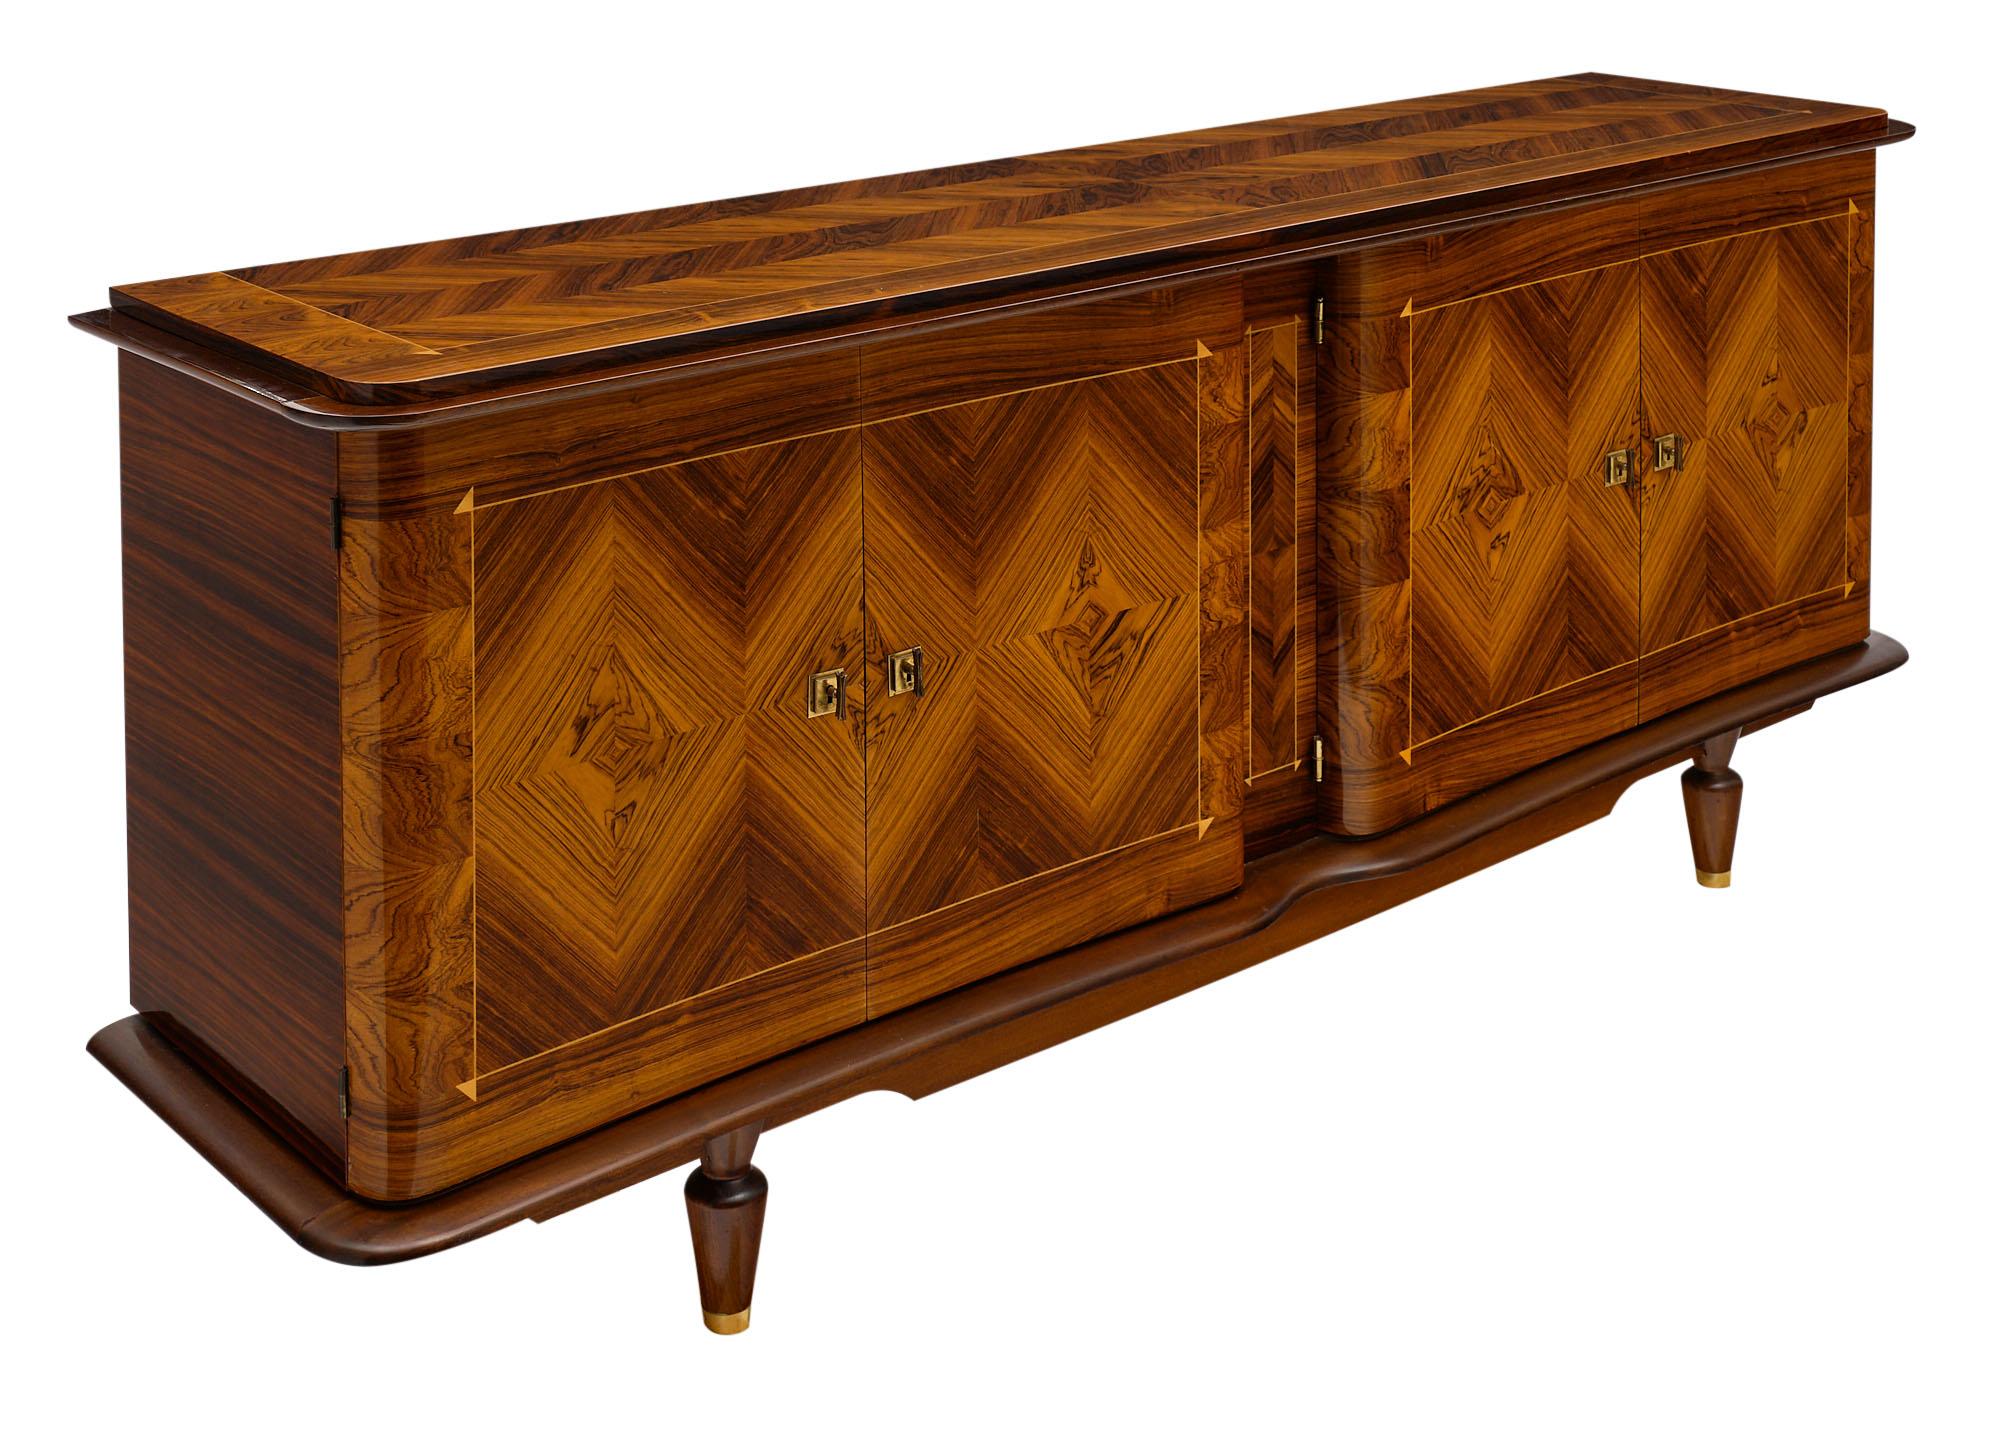 Buffet from France made of rosewood; tinted rosewood; and burled walnut. The important sideboard features an elaborate work of parquetry on its top; sides; and facade where four doors open up to an array of shelves and drawers within. This piece is